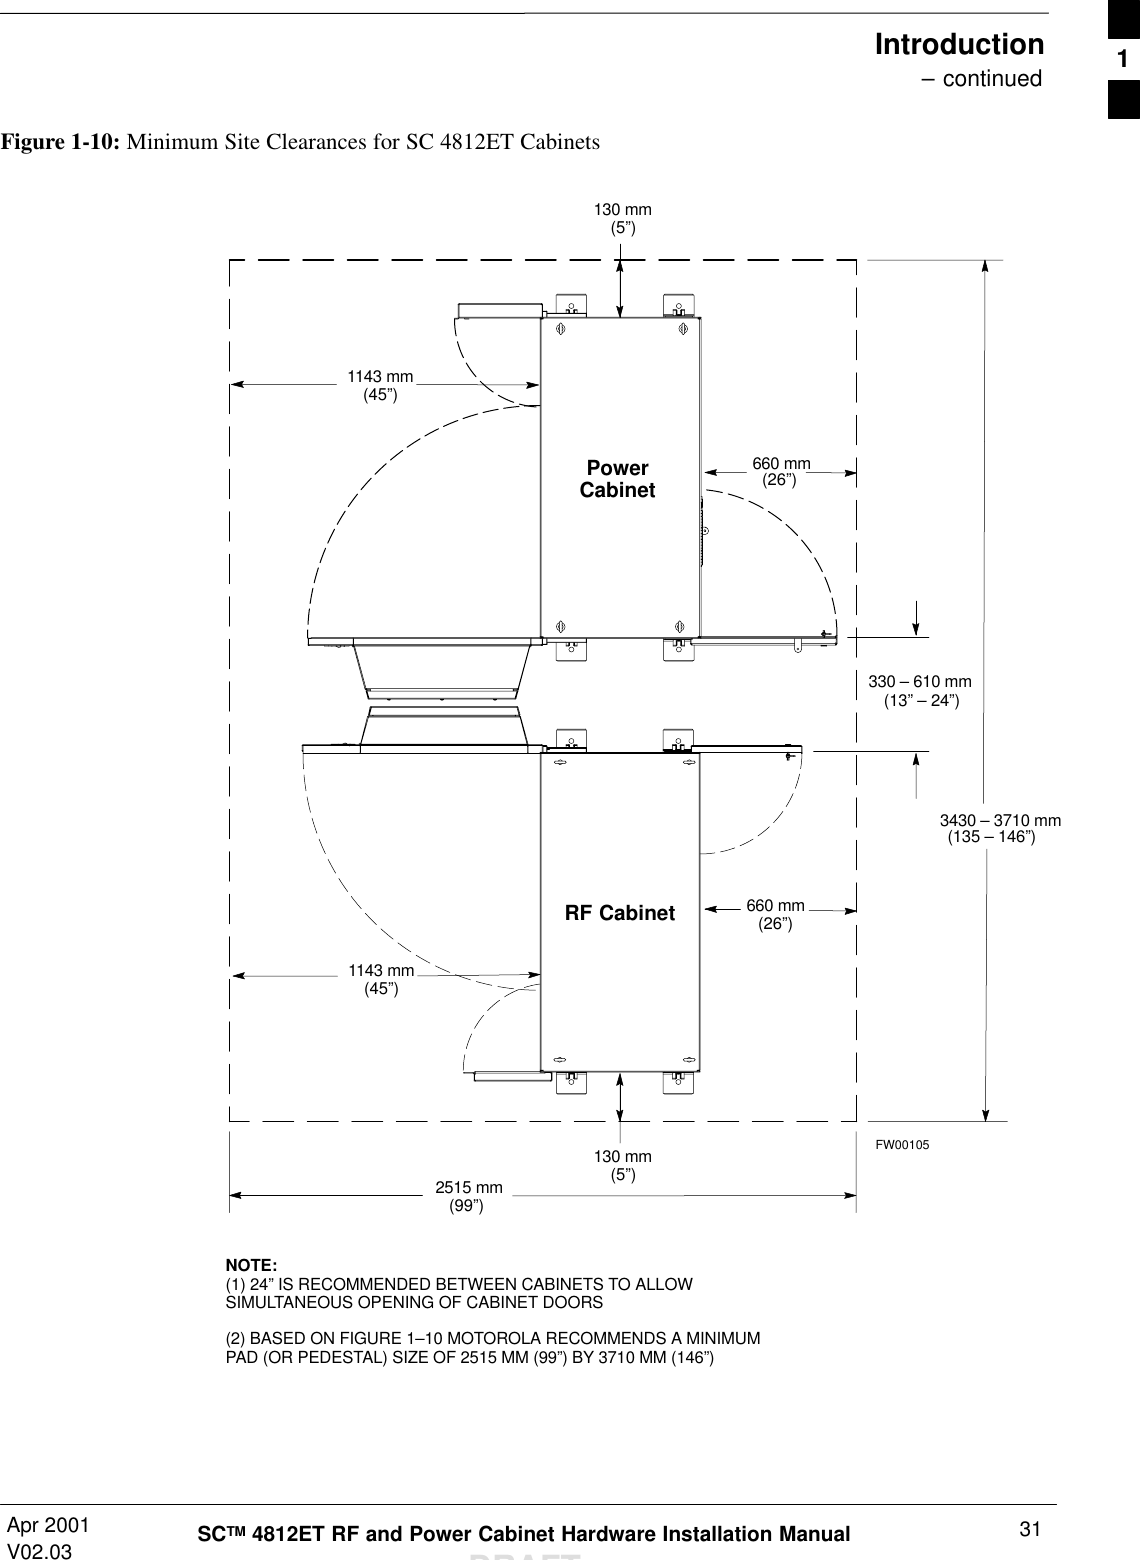 Introduction – continuedApr 2001V02.03 31SCTM 4812ET RF and Power Cabinet Hardware Installation ManualDRAFTFigure 1-10: Minimum Site Clearances for SC 4812ET CabinetsNOTE:(1) 24” IS RECOMMENDED BETWEEN CABINETS TO ALLOWSIMULTANEOUS OPENING OF CABINET DOORS(2) BASED ON FIGURE 1–10 MOTOROLA RECOMMENDS A MINIMUMPAD (OR PEDESTAL) SIZE OF 2515 MM (99”) BY 3710 MM (146”)130 mm(5”)130 mm(5”)330 – 610 mm(13” – 24”)660 mm(26”)1143 mm(45”)3430 – 3710 mm(135 – 146”)2515 mm(99”)660 mm(26”)1143 mm(45”)PowerCabinetRF CabinetFW001051